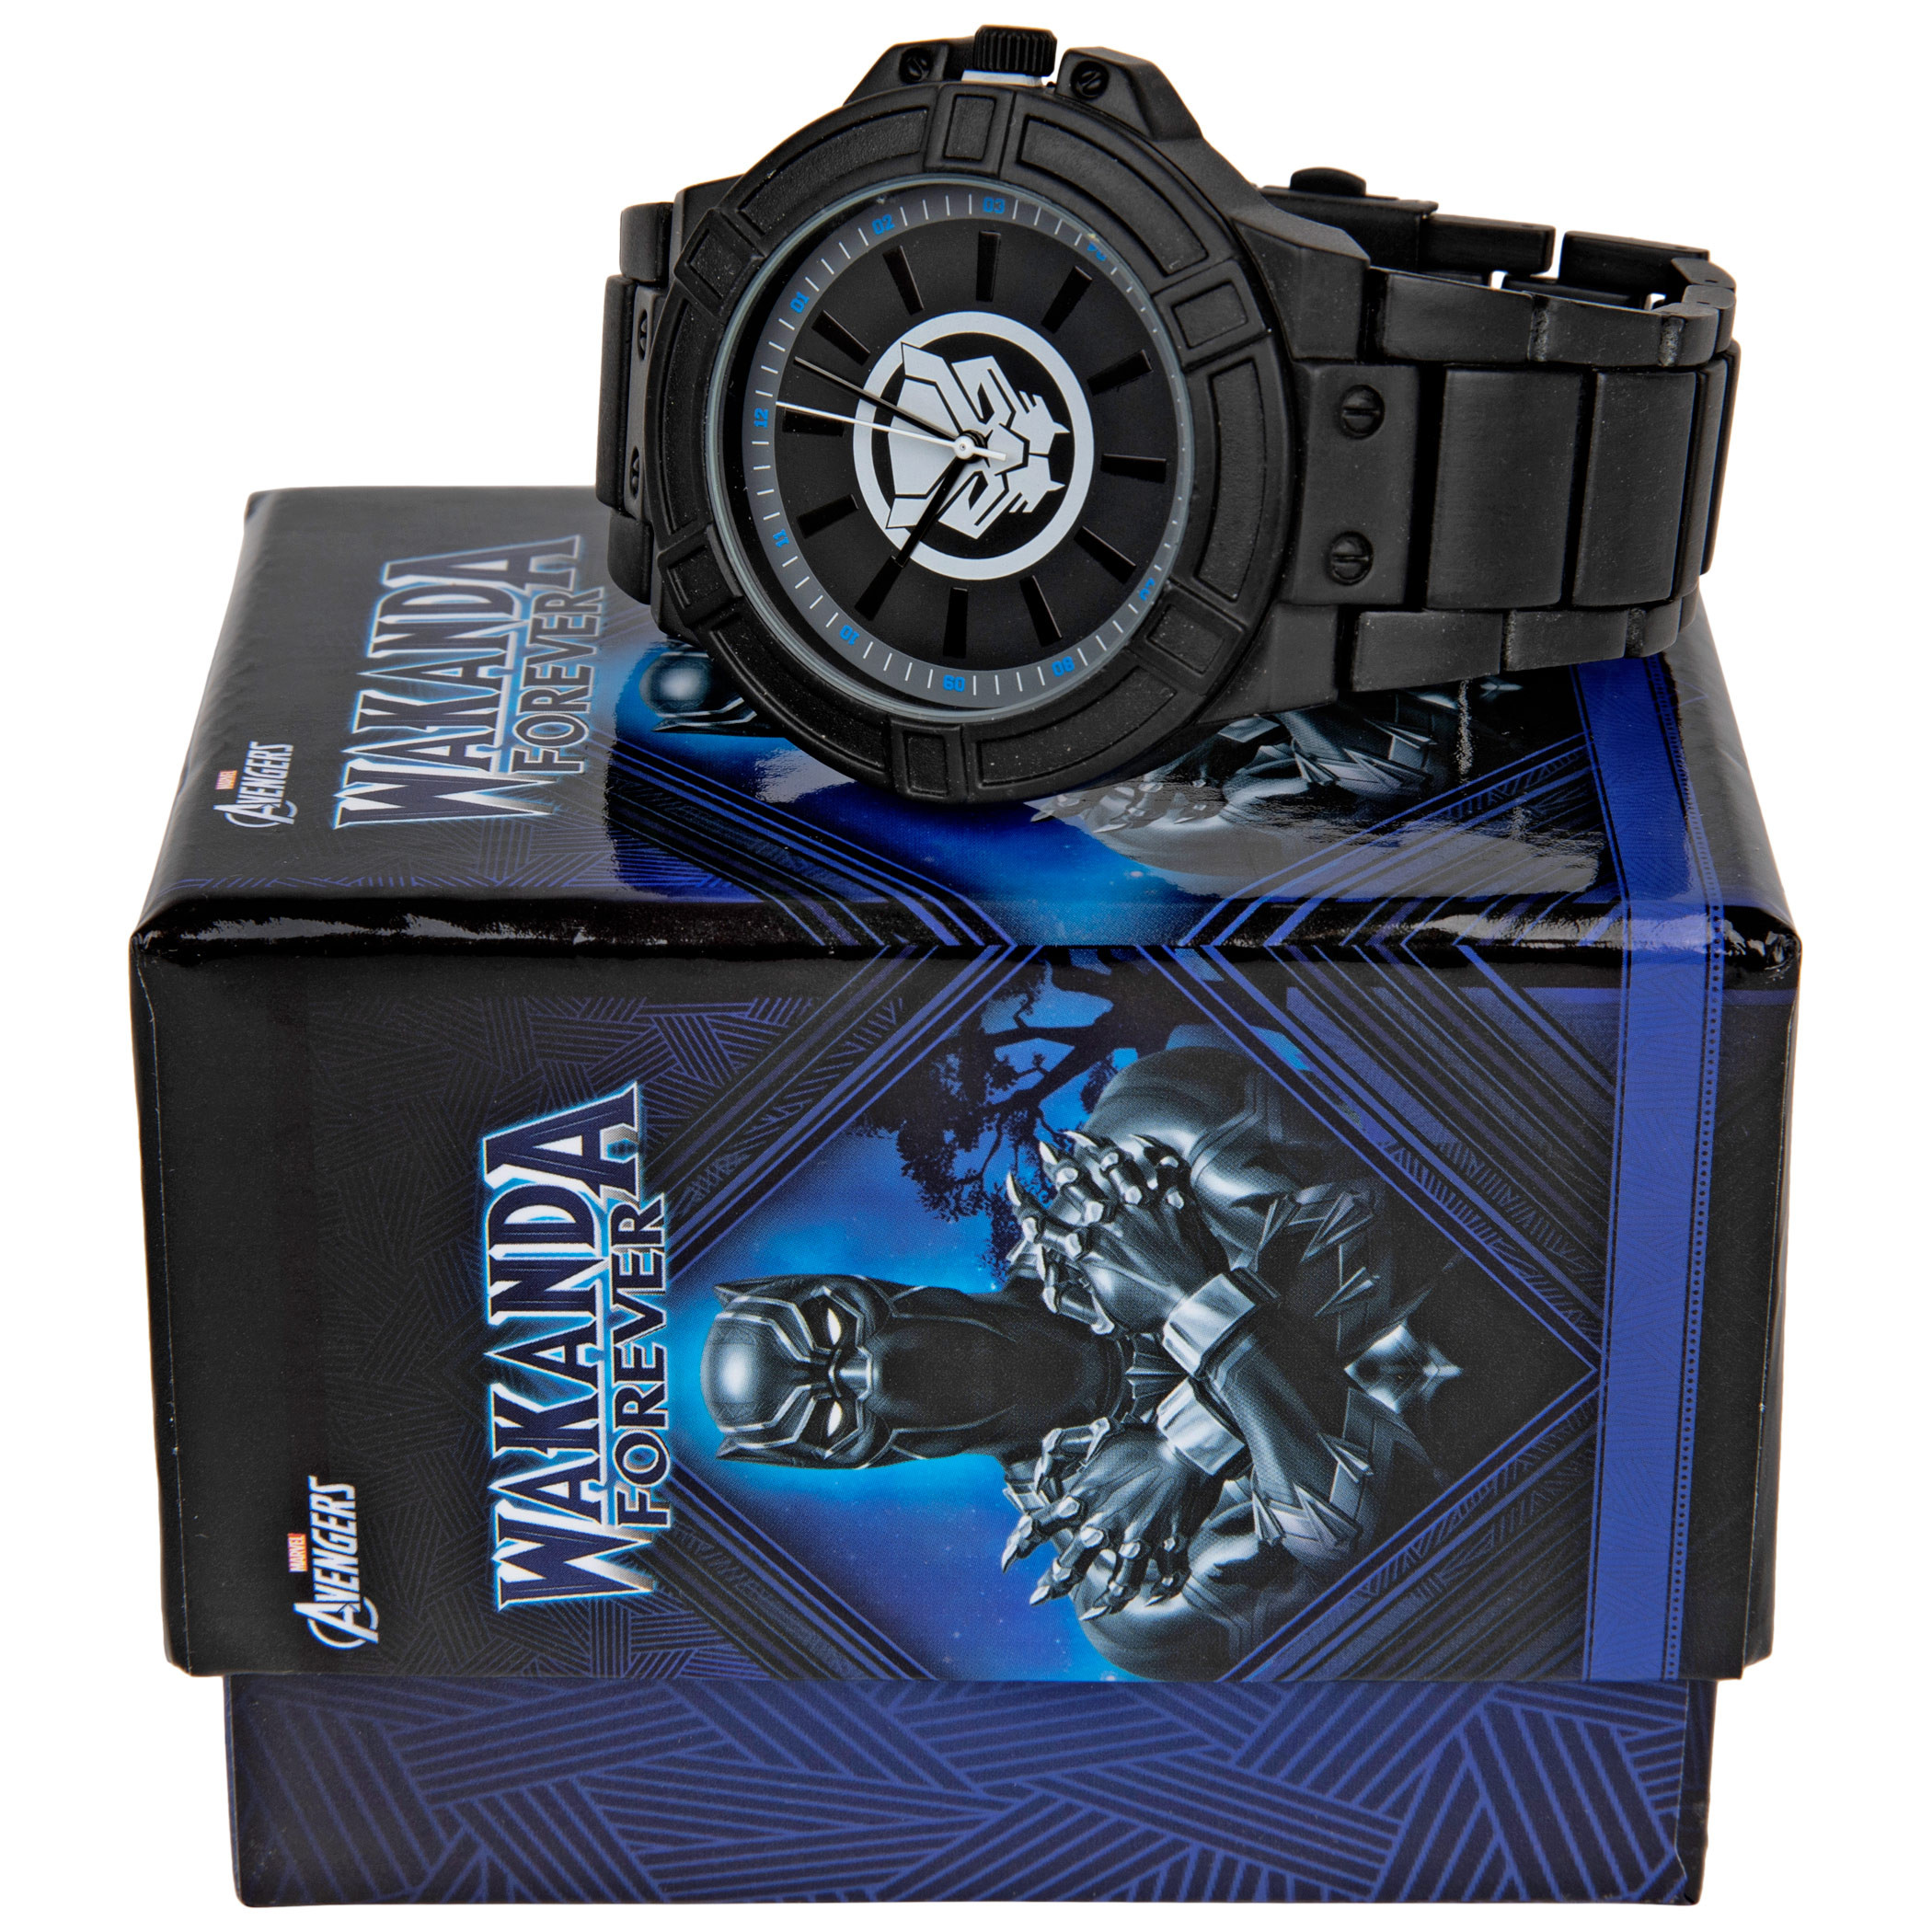 Marvel Black Panther Symbol Watch Face with Black Metal Band